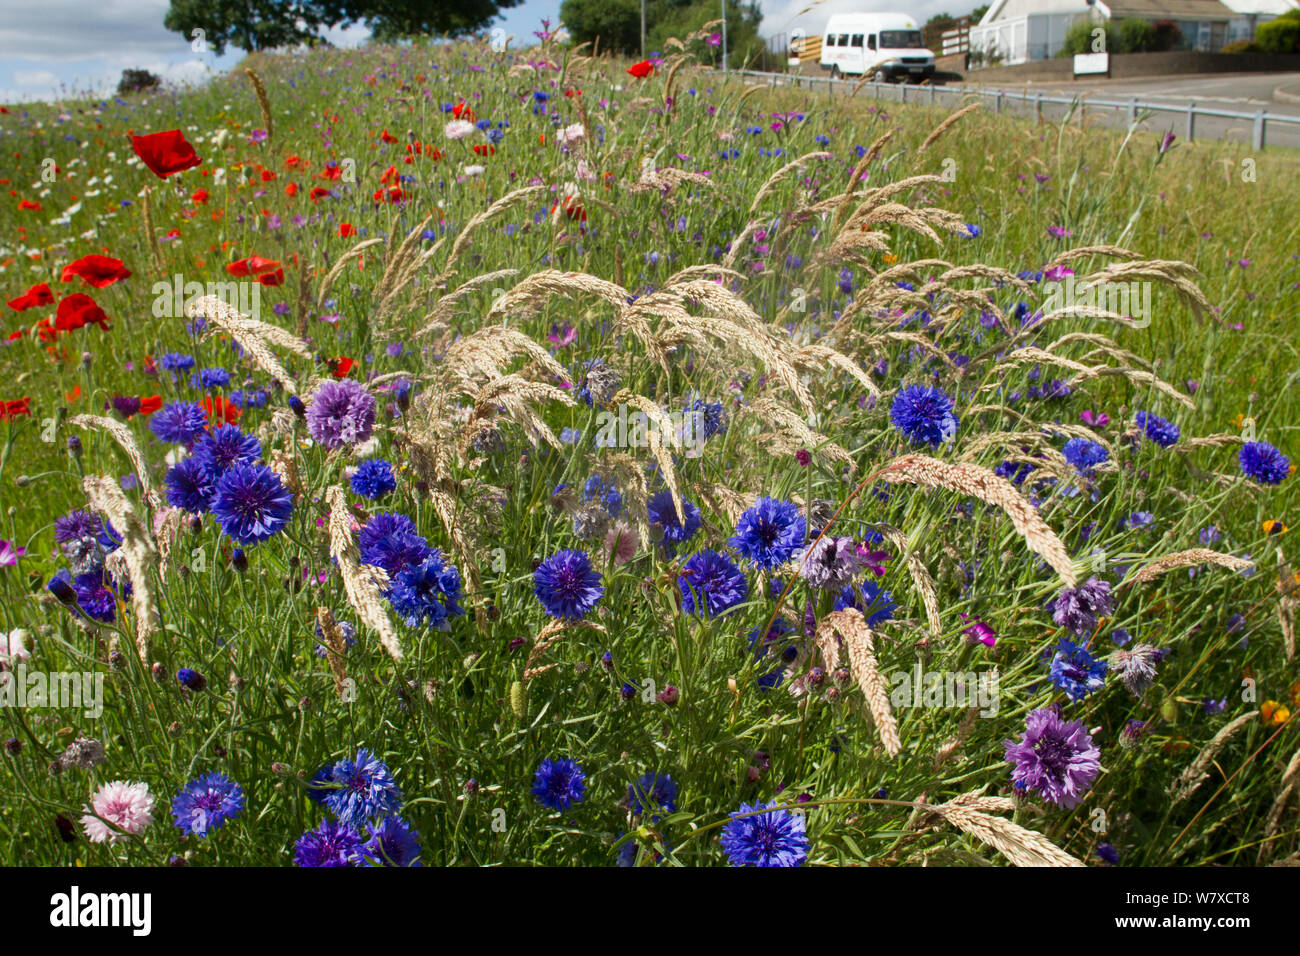 Wildflowers including Poppies (Papaver sp) and Cornflowers (Centaurea cyanus) planted in community green space to attract bees. Part of a collaboration between Bron Afon community Housing Trust and the Friends of the Earth &#39;Bee Friendly&#39; project. South Wales, UK, July 2014. Stock Photo